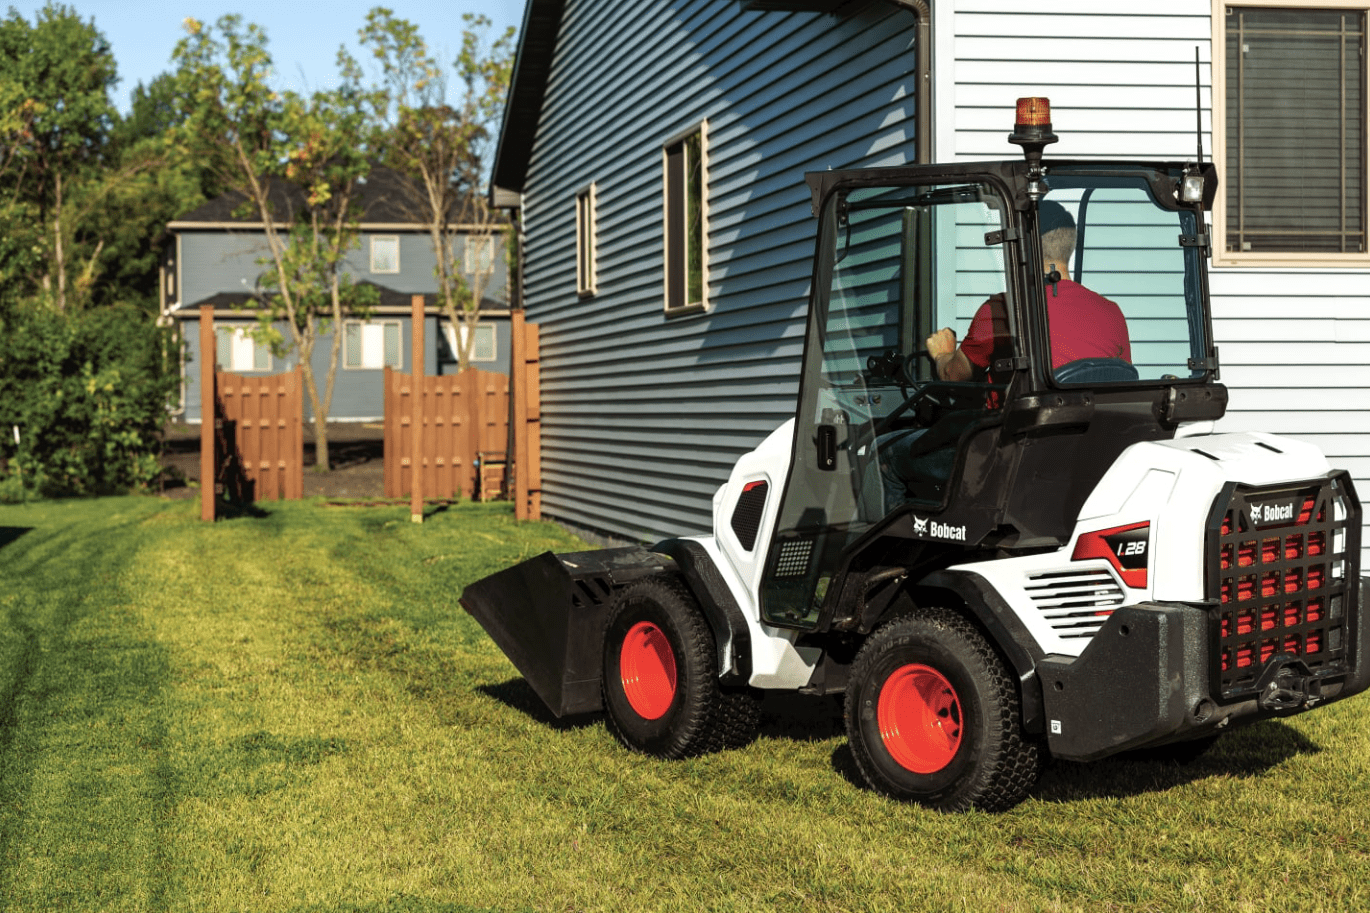 Browse Specs and more for the L28 Small Articulated Loader - Bobcat of Atlanta